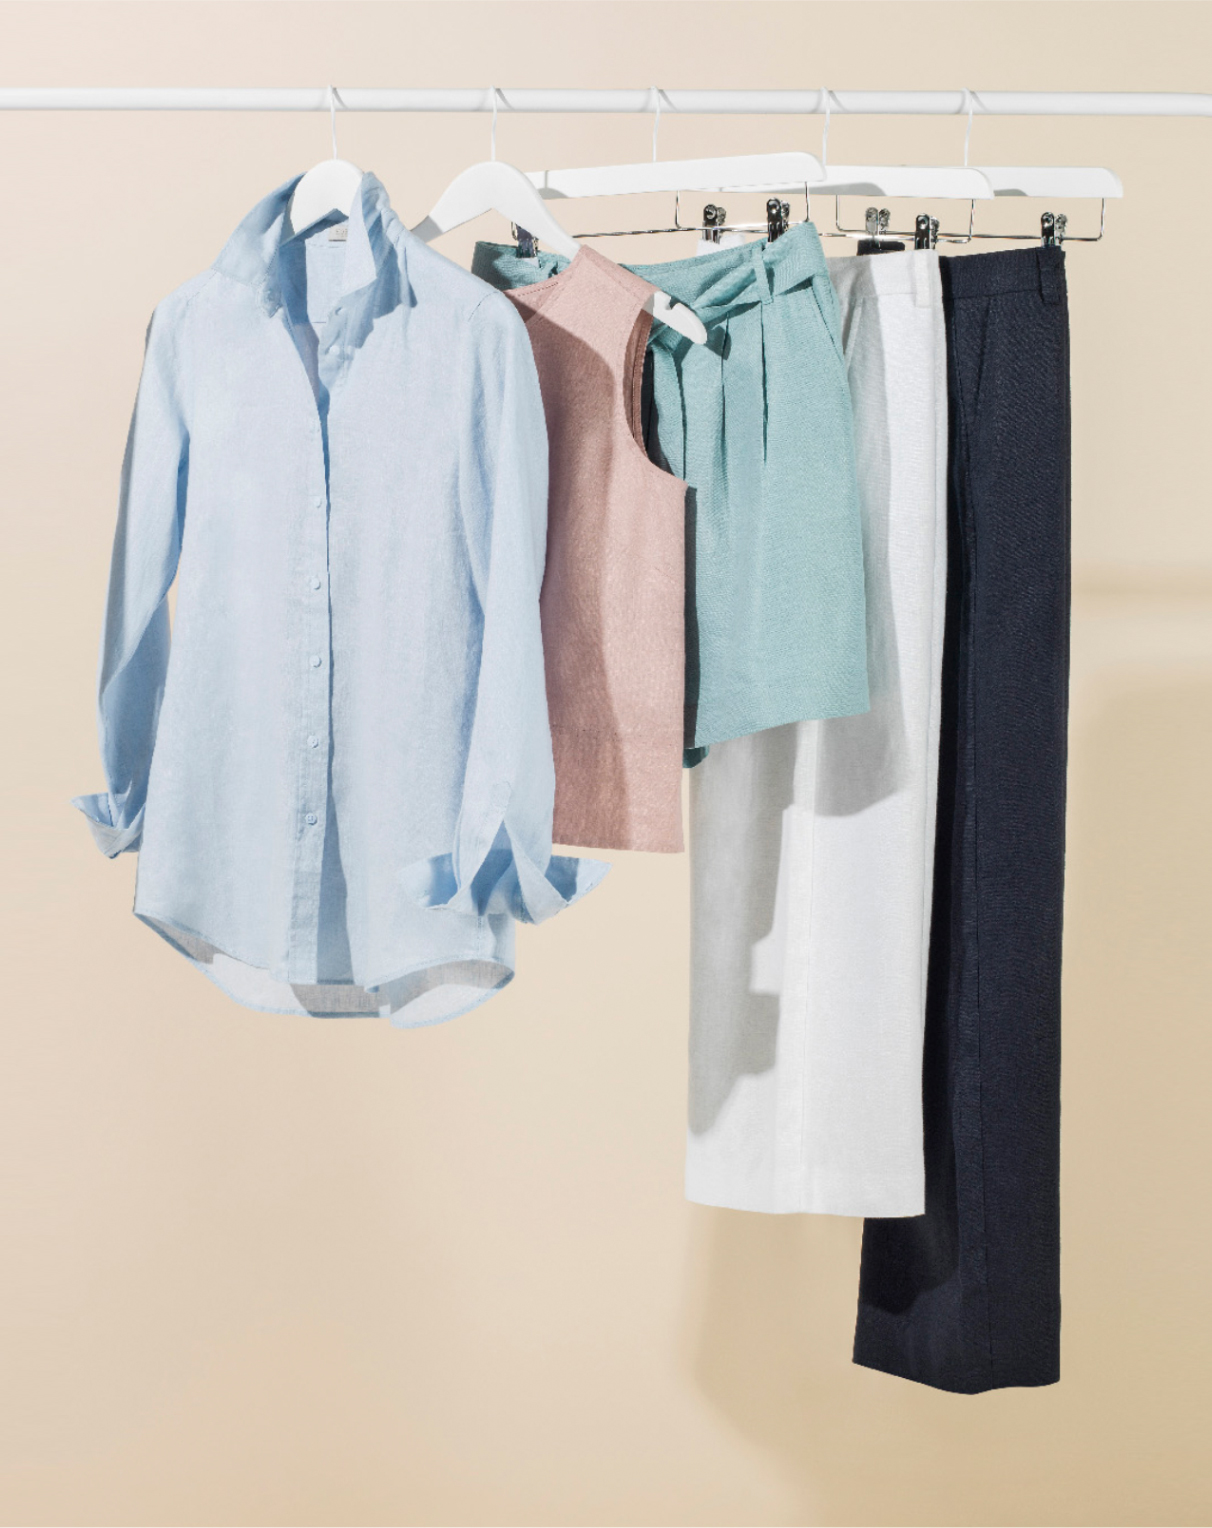 A rail of linen clothes including a shirt, shell tops, shorts and trousers.